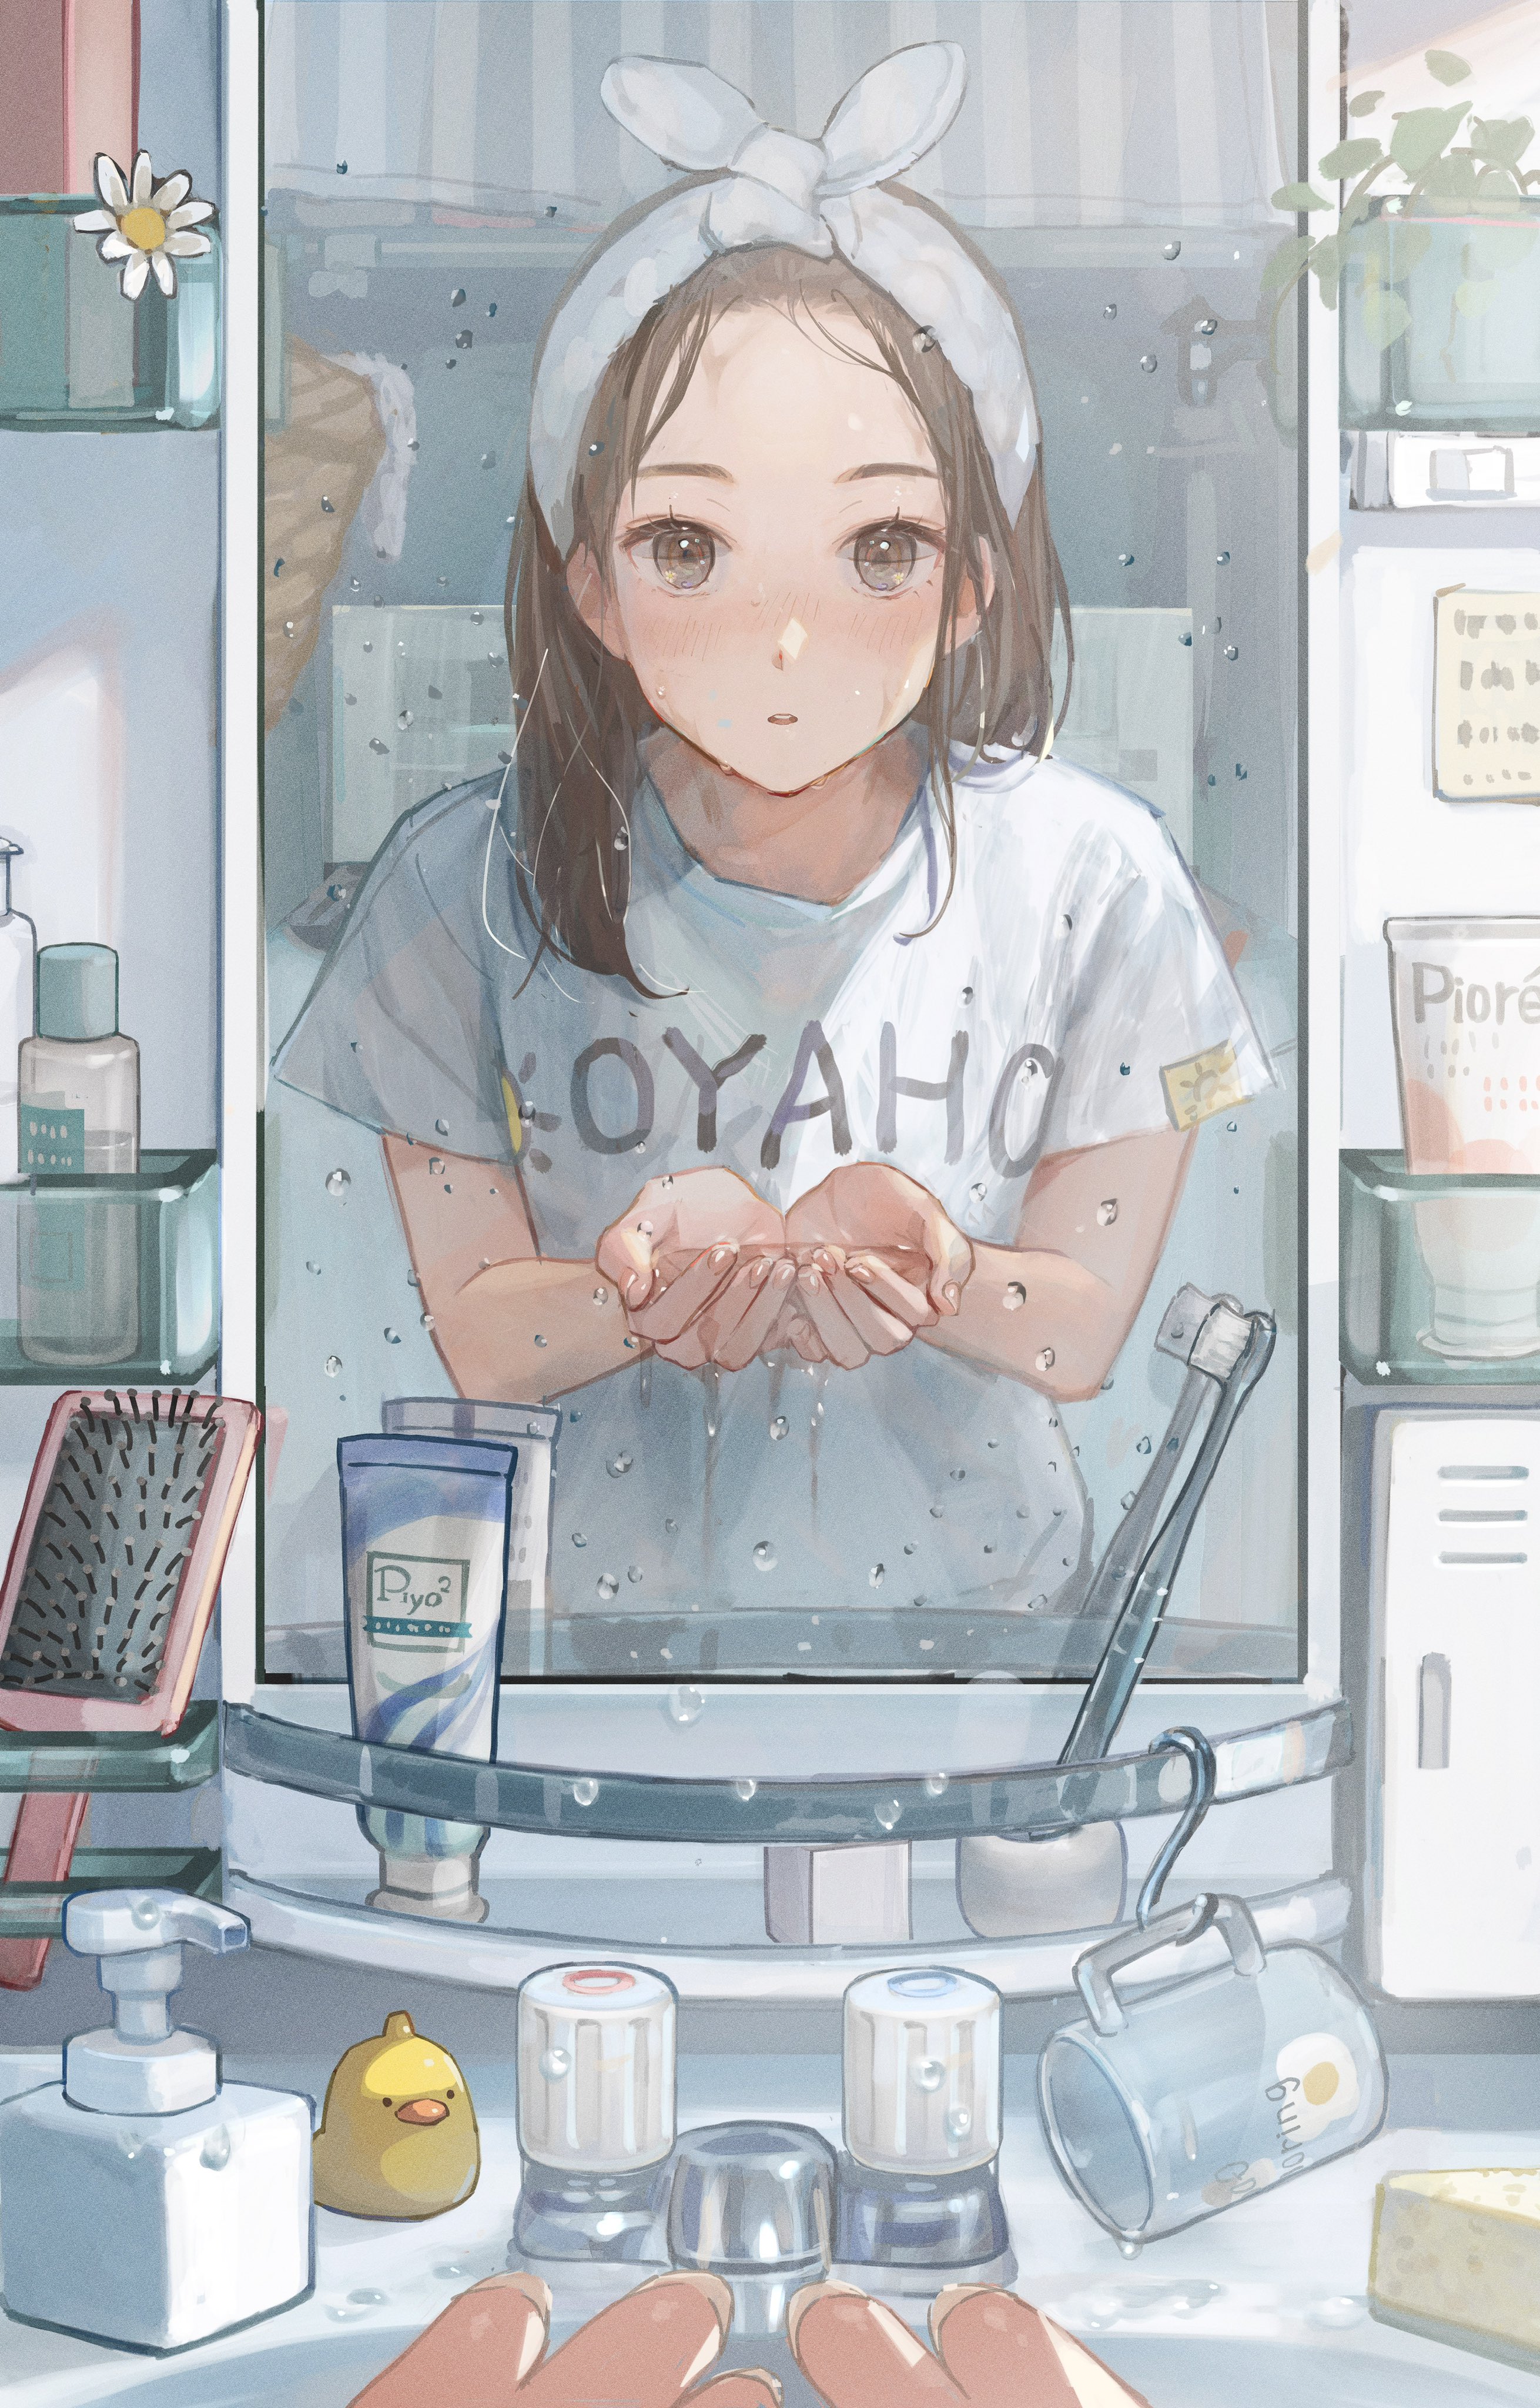 Anime Girls Short Hair Mirror Bathroom Looking At Viewer Reflection Portrait Display Water Drops 2620x4096